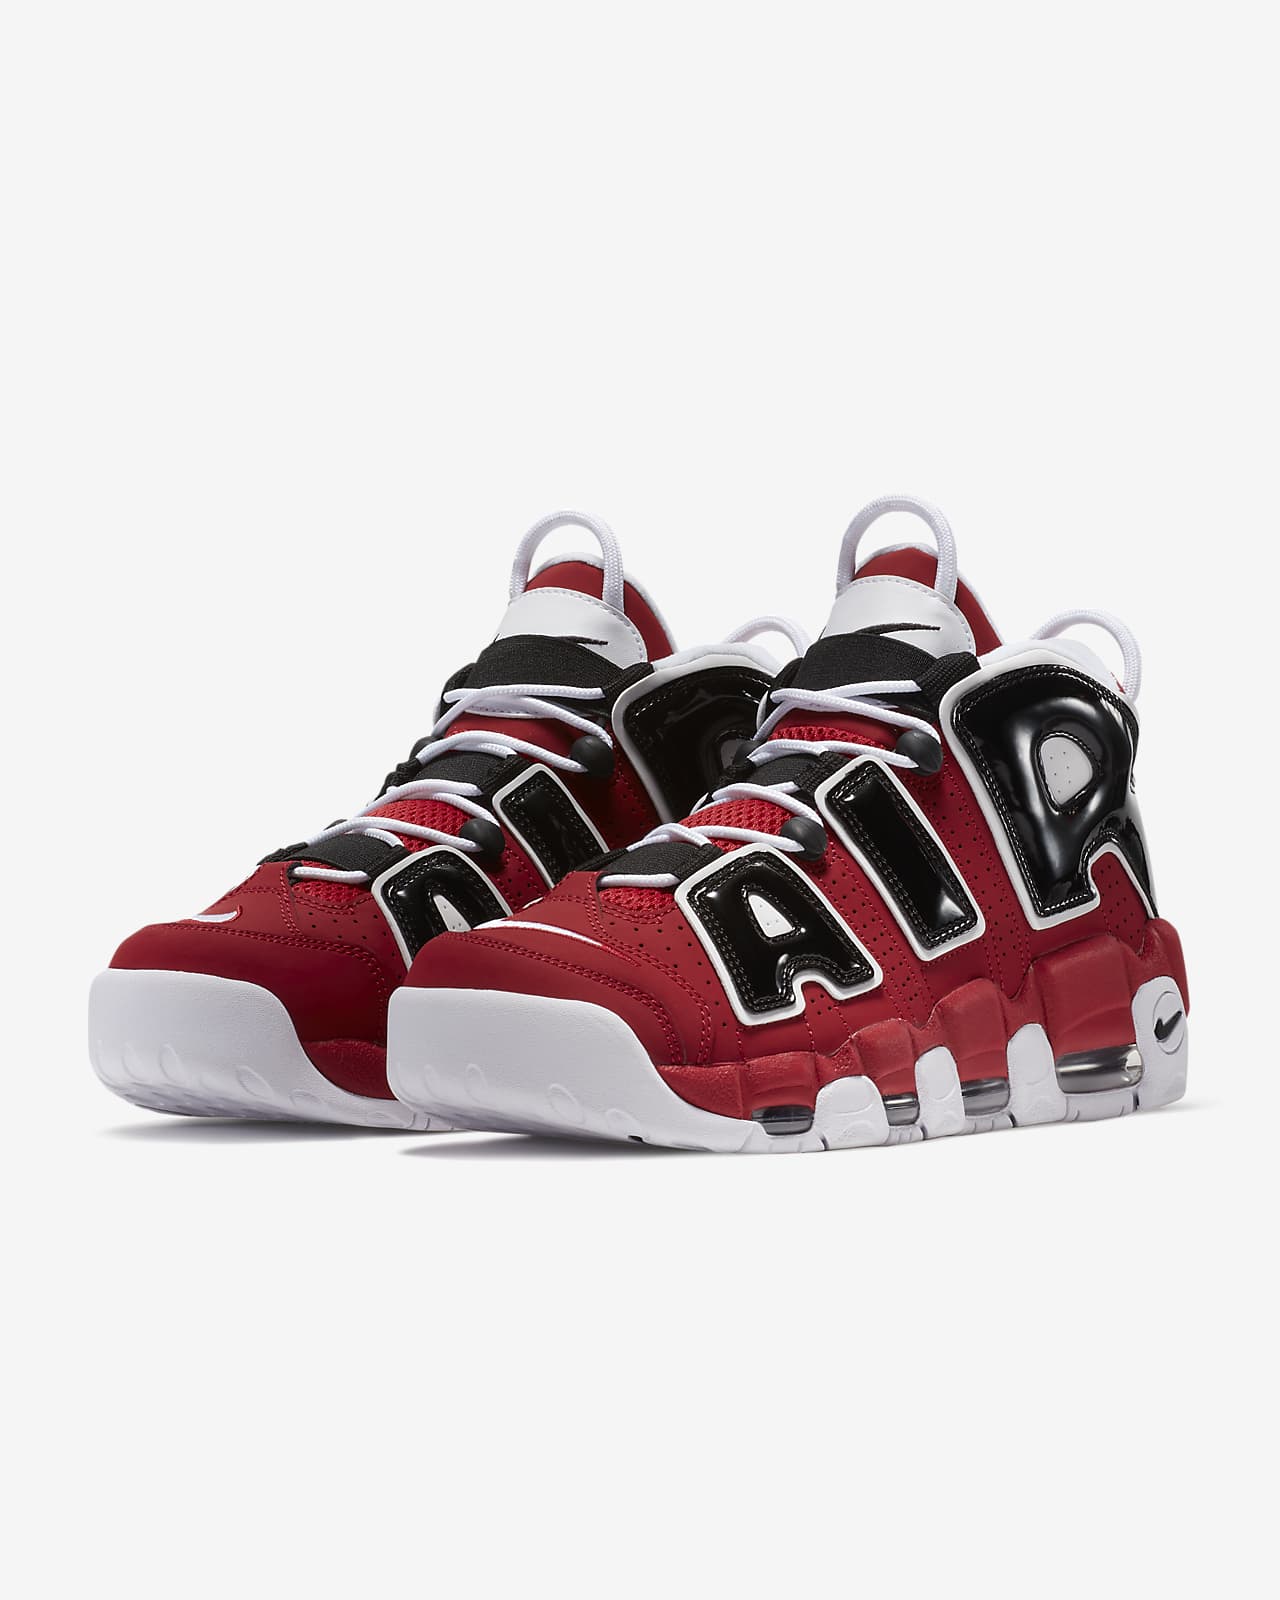 nike more uptempo size 6